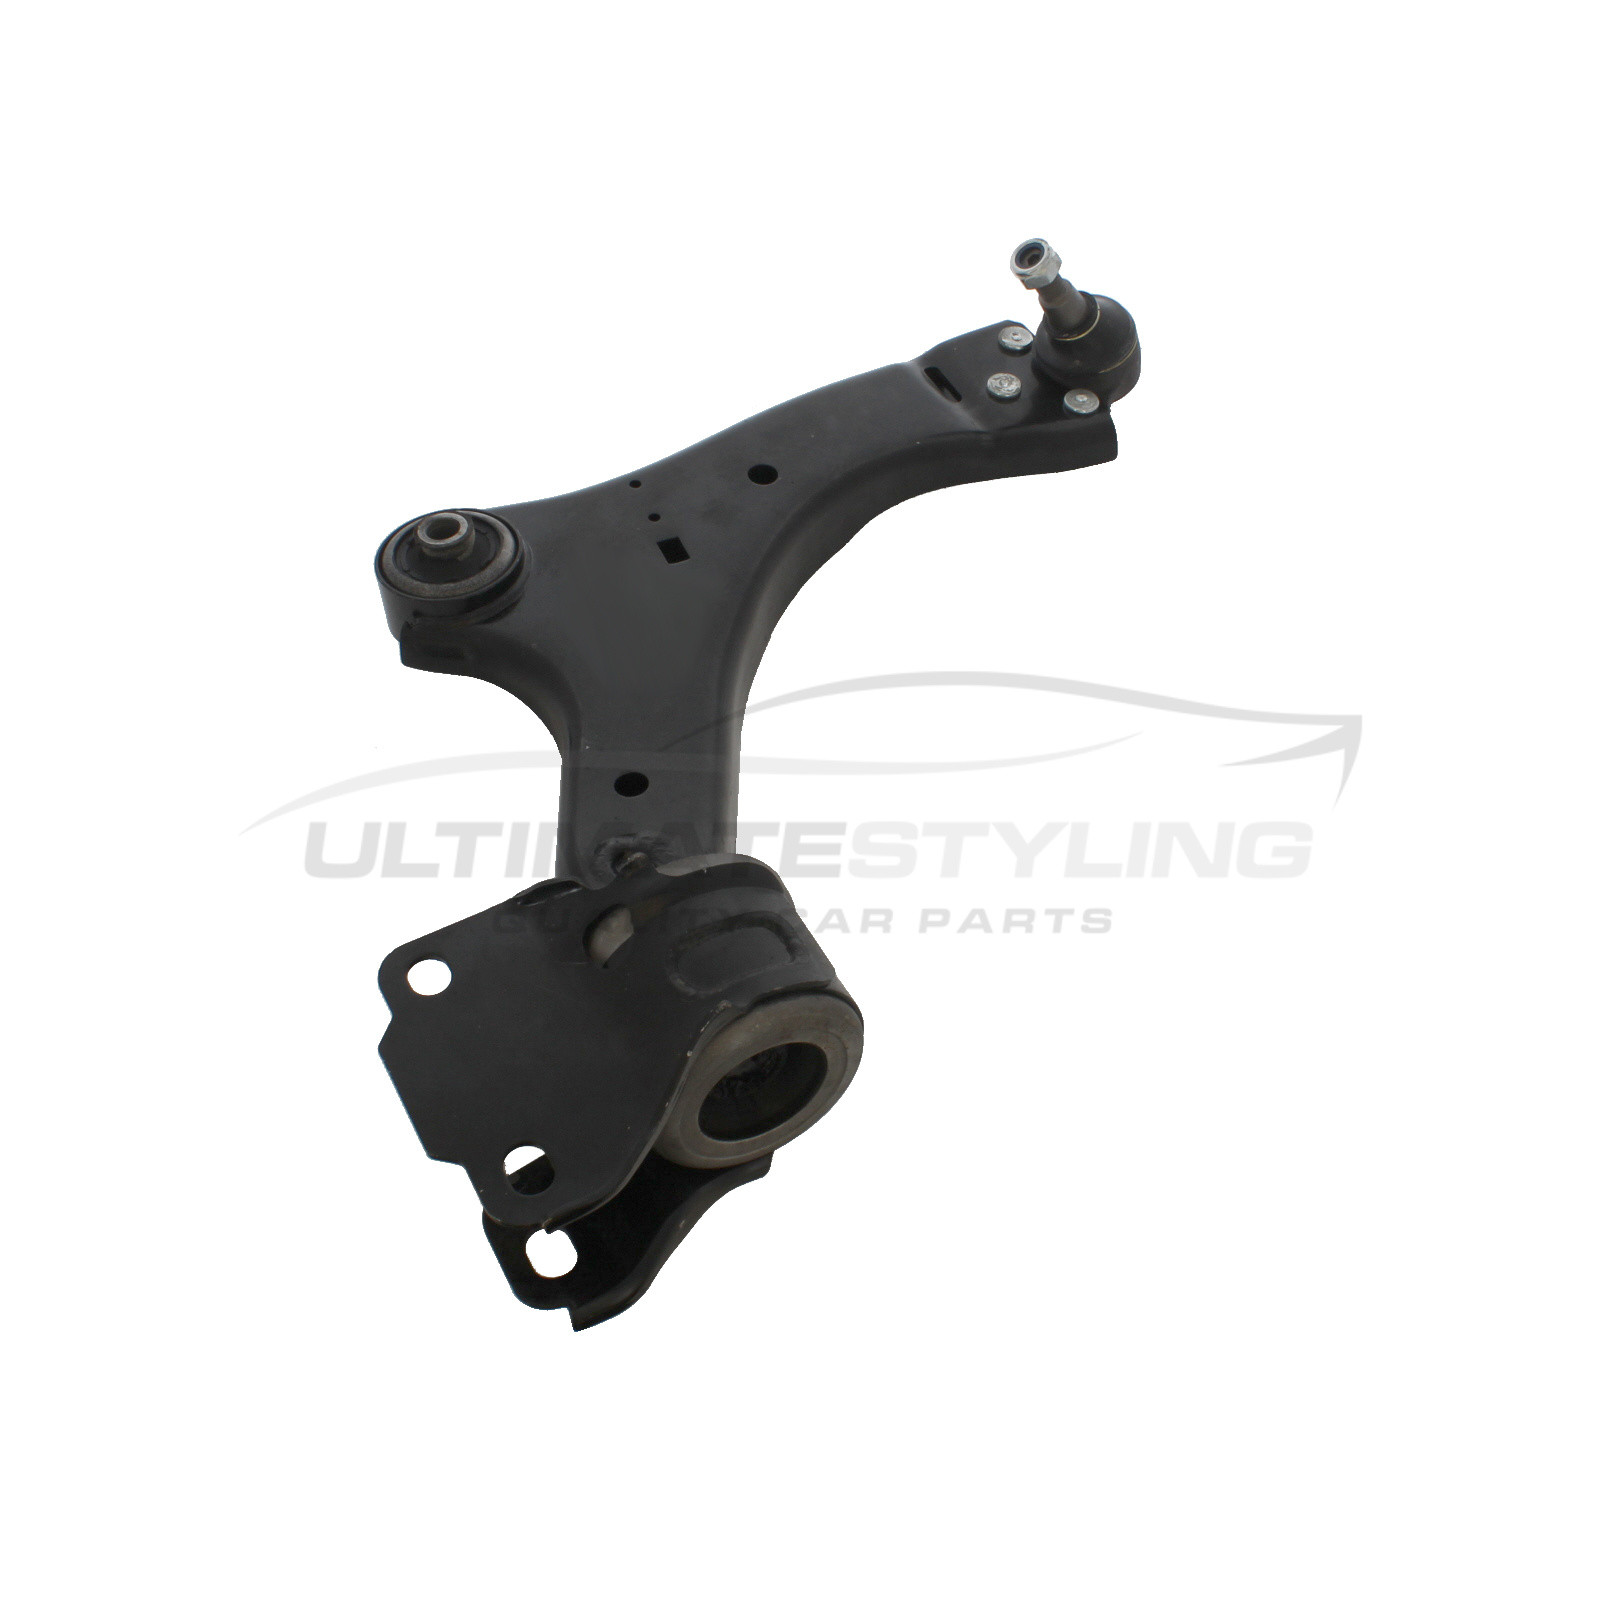 Suspension Arm - Front Lower (RH) for Ford Galaxy / Mondeo / S-MAX, Volvo  S60 / S80 / V60 and others